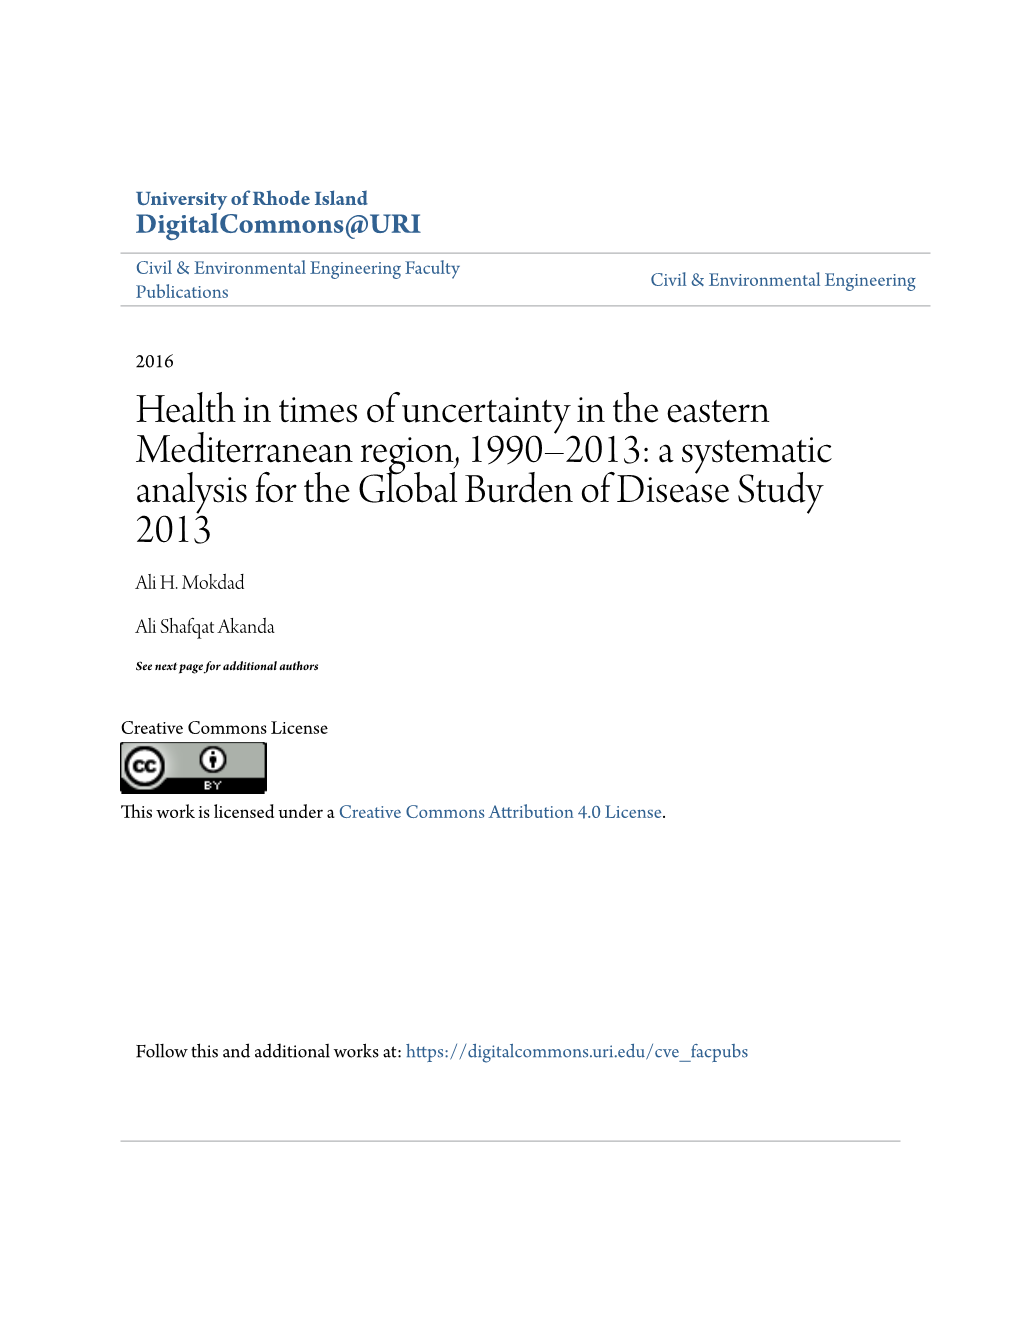 Health in Times of Uncertainty in the Eastern Mediterranean Region, 1990–2013: a Systematic Analysis for the Global Burden of Disease Study 2013 Ali H